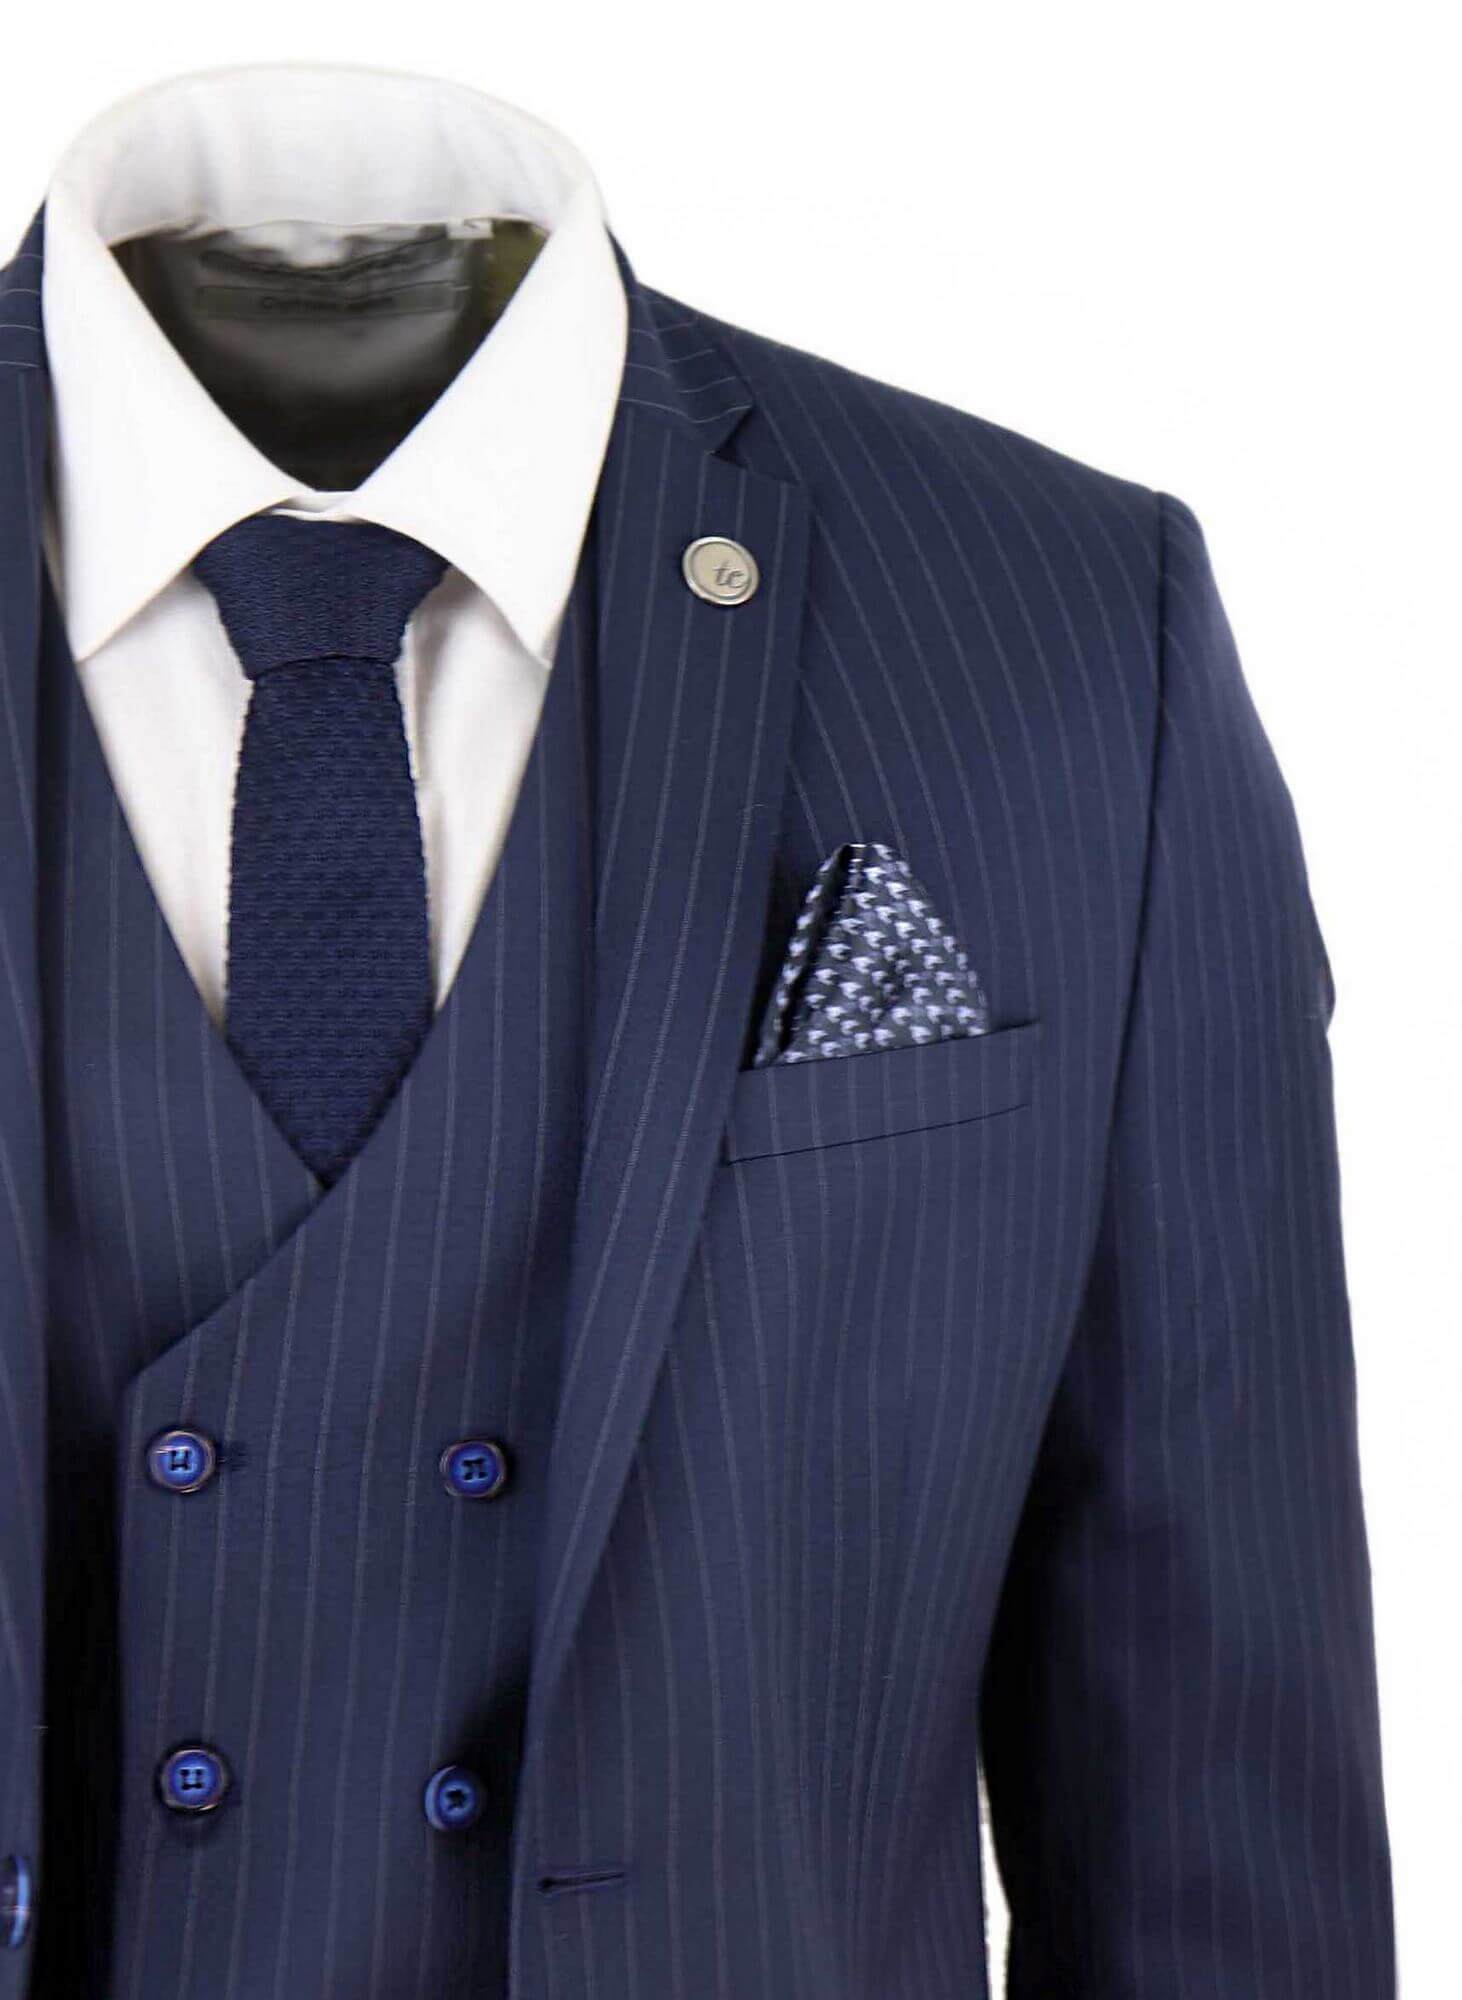 Navy Blue Striped Suit for Men Doublebreasted Blazer Six Button Style  Tailored | eBay